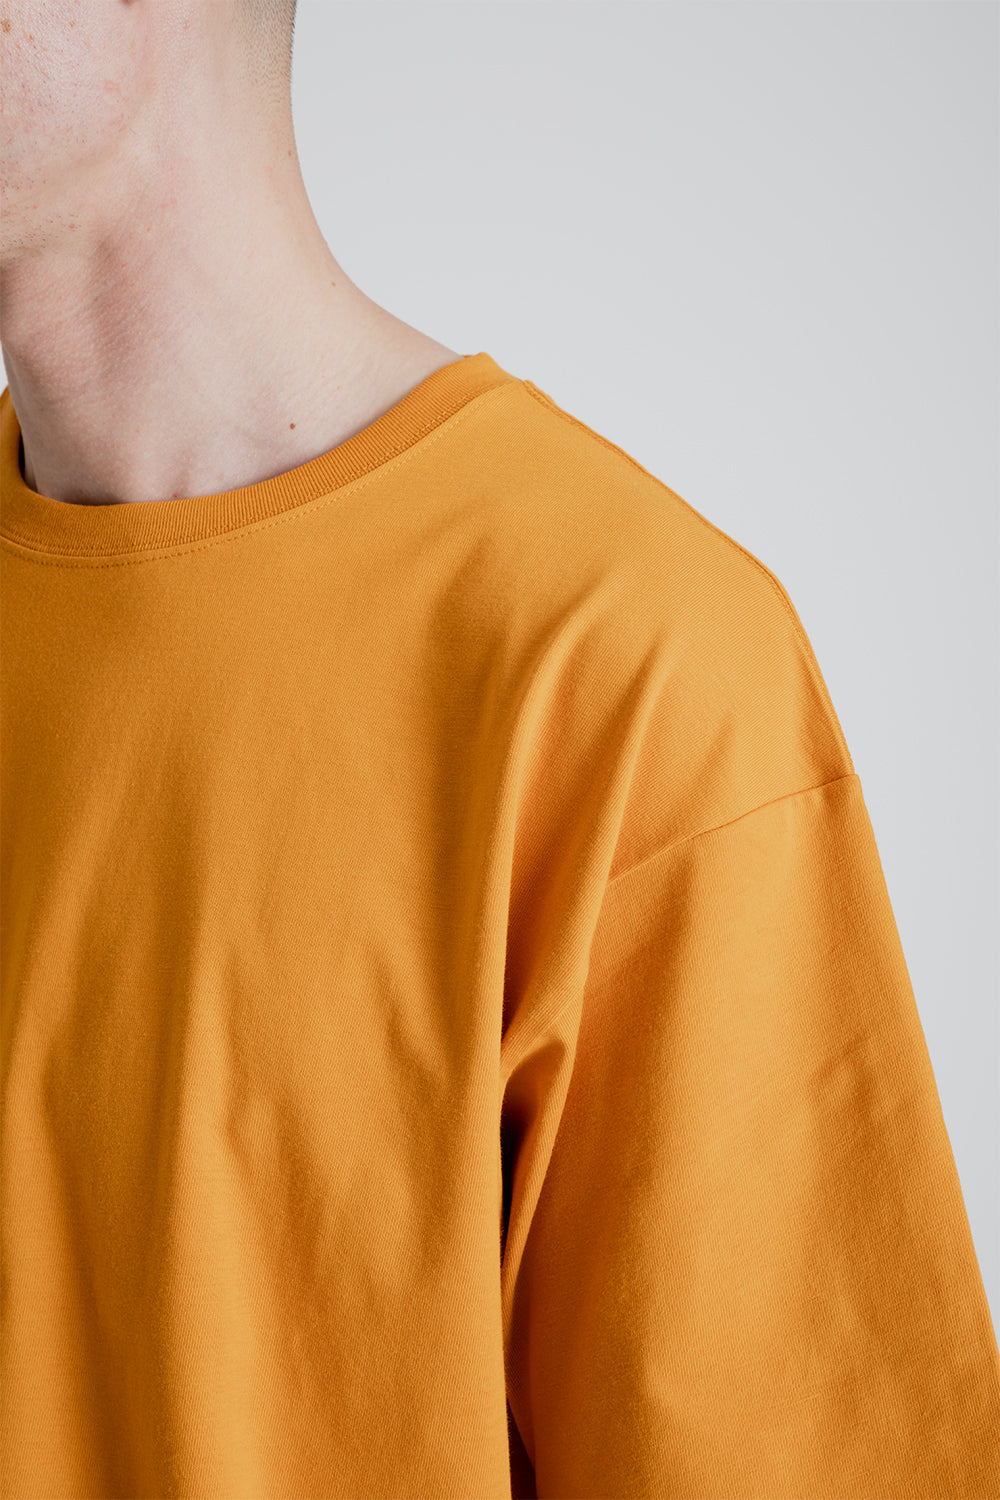 Adapture Relaxed Fit T-Shirt in Sunflower